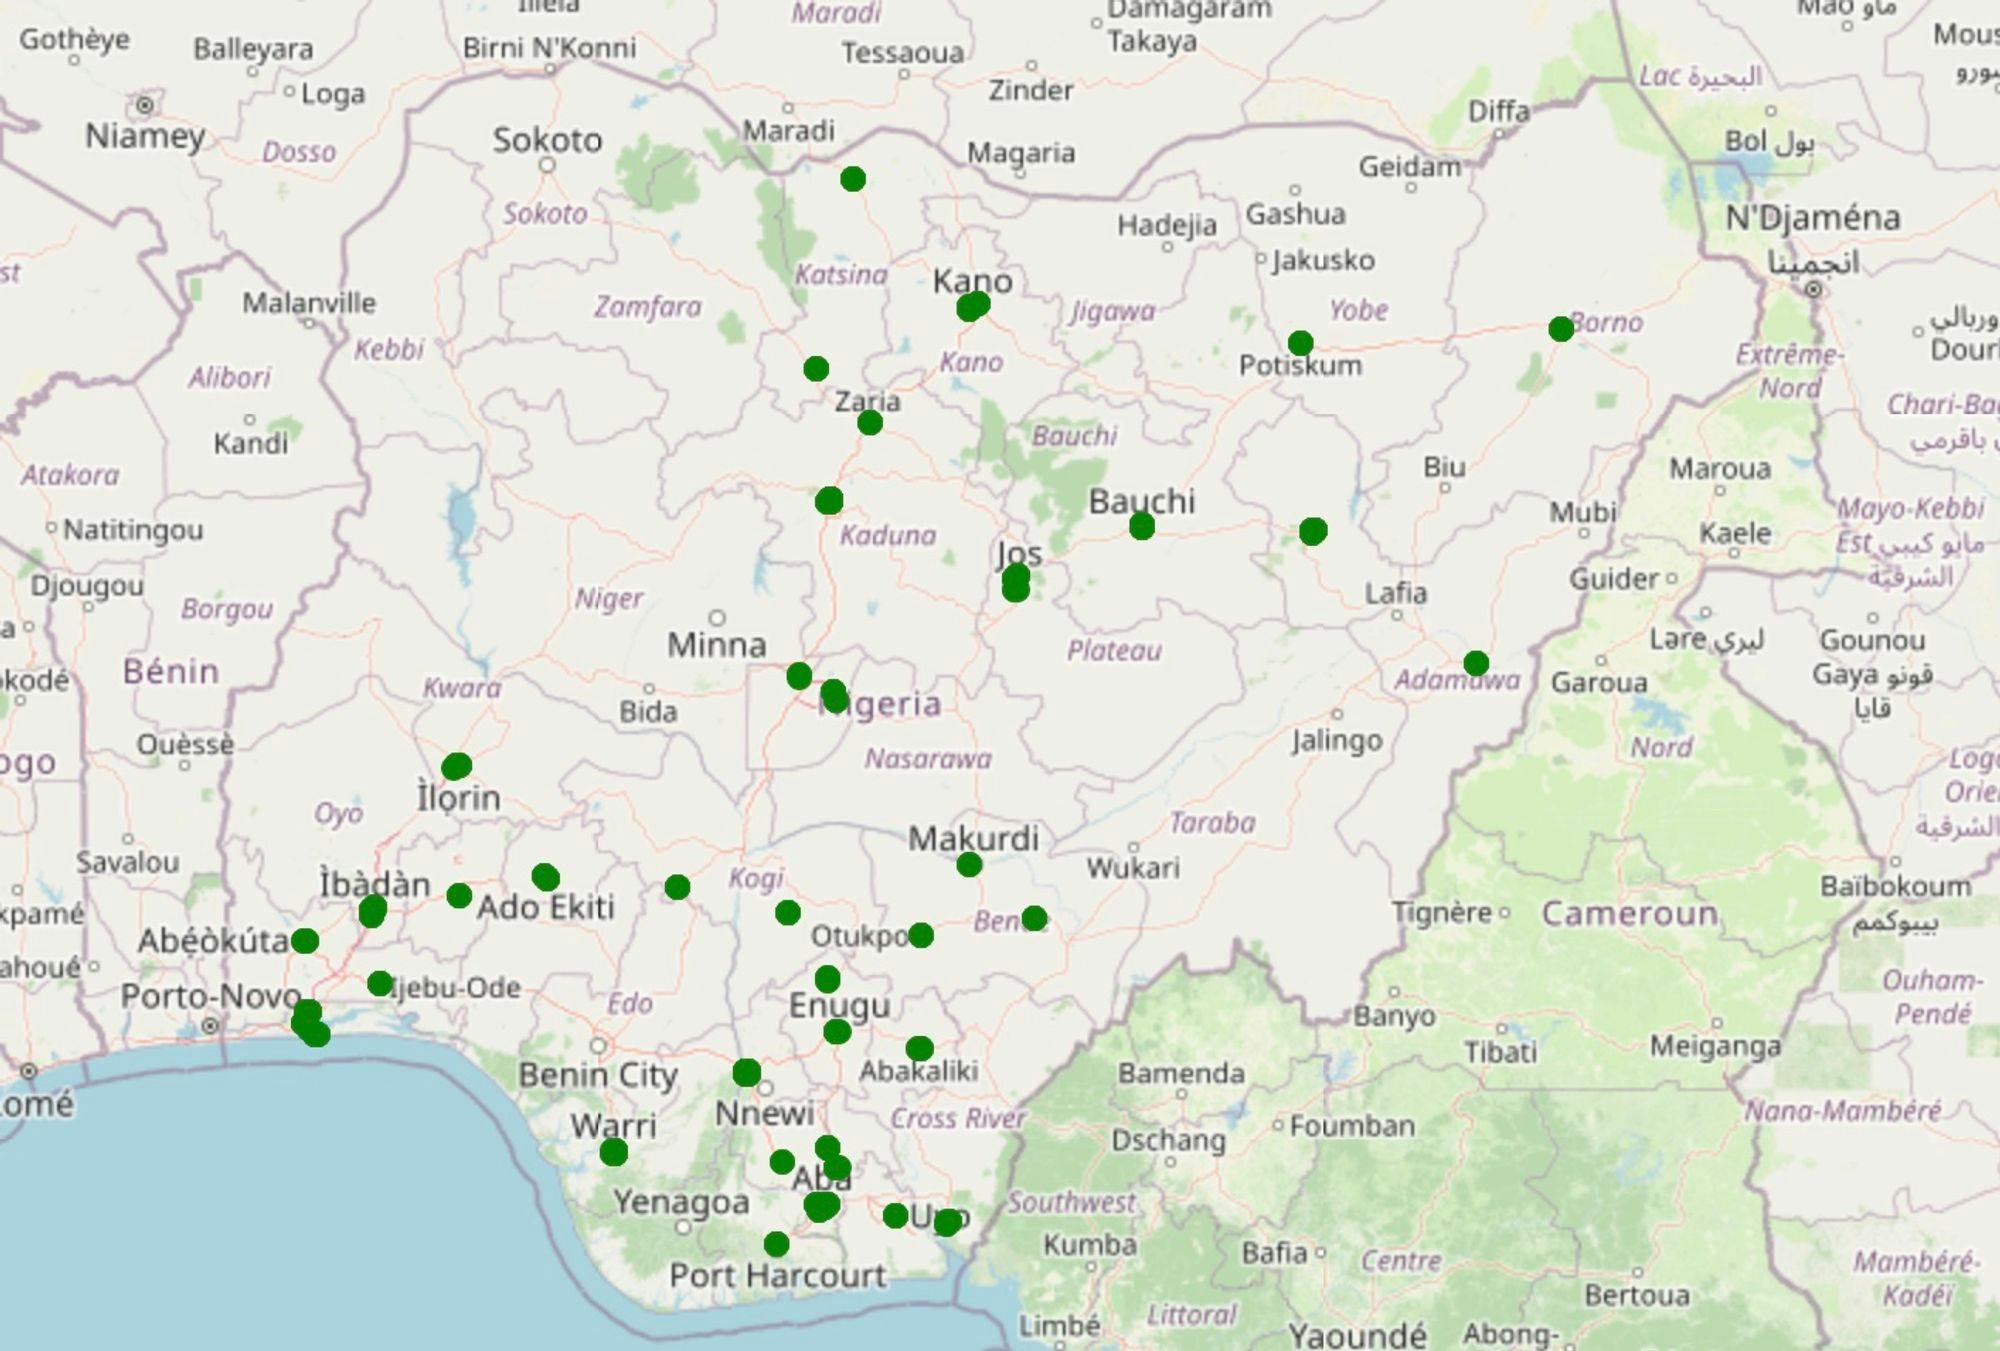 Figure 1: Across Nigeria, 74 markets were selected by Nigeria’s Rural Electrification Agency (REA) for a baseline energy audit survey to inform future energy system investments. nLine sensors were placed in these markets to remotely monitor power quality and reliability. Note: the markers for locations of some markets overlap within this map.